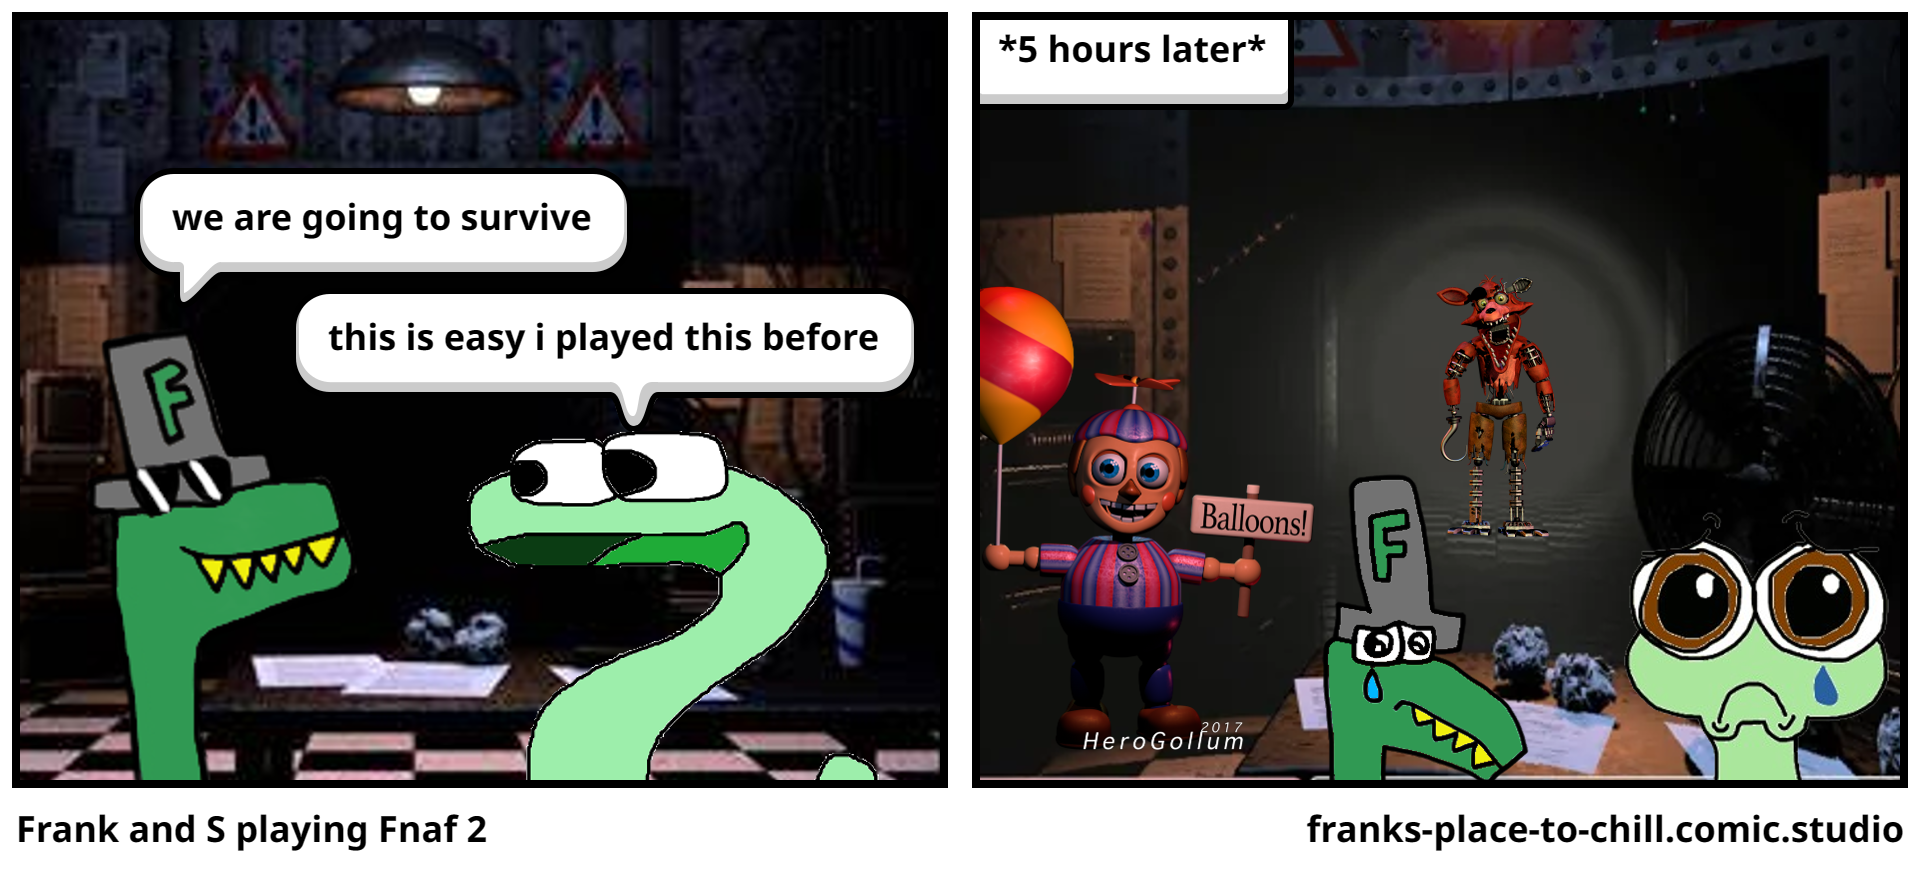 Frank and S playing Fnaf 2